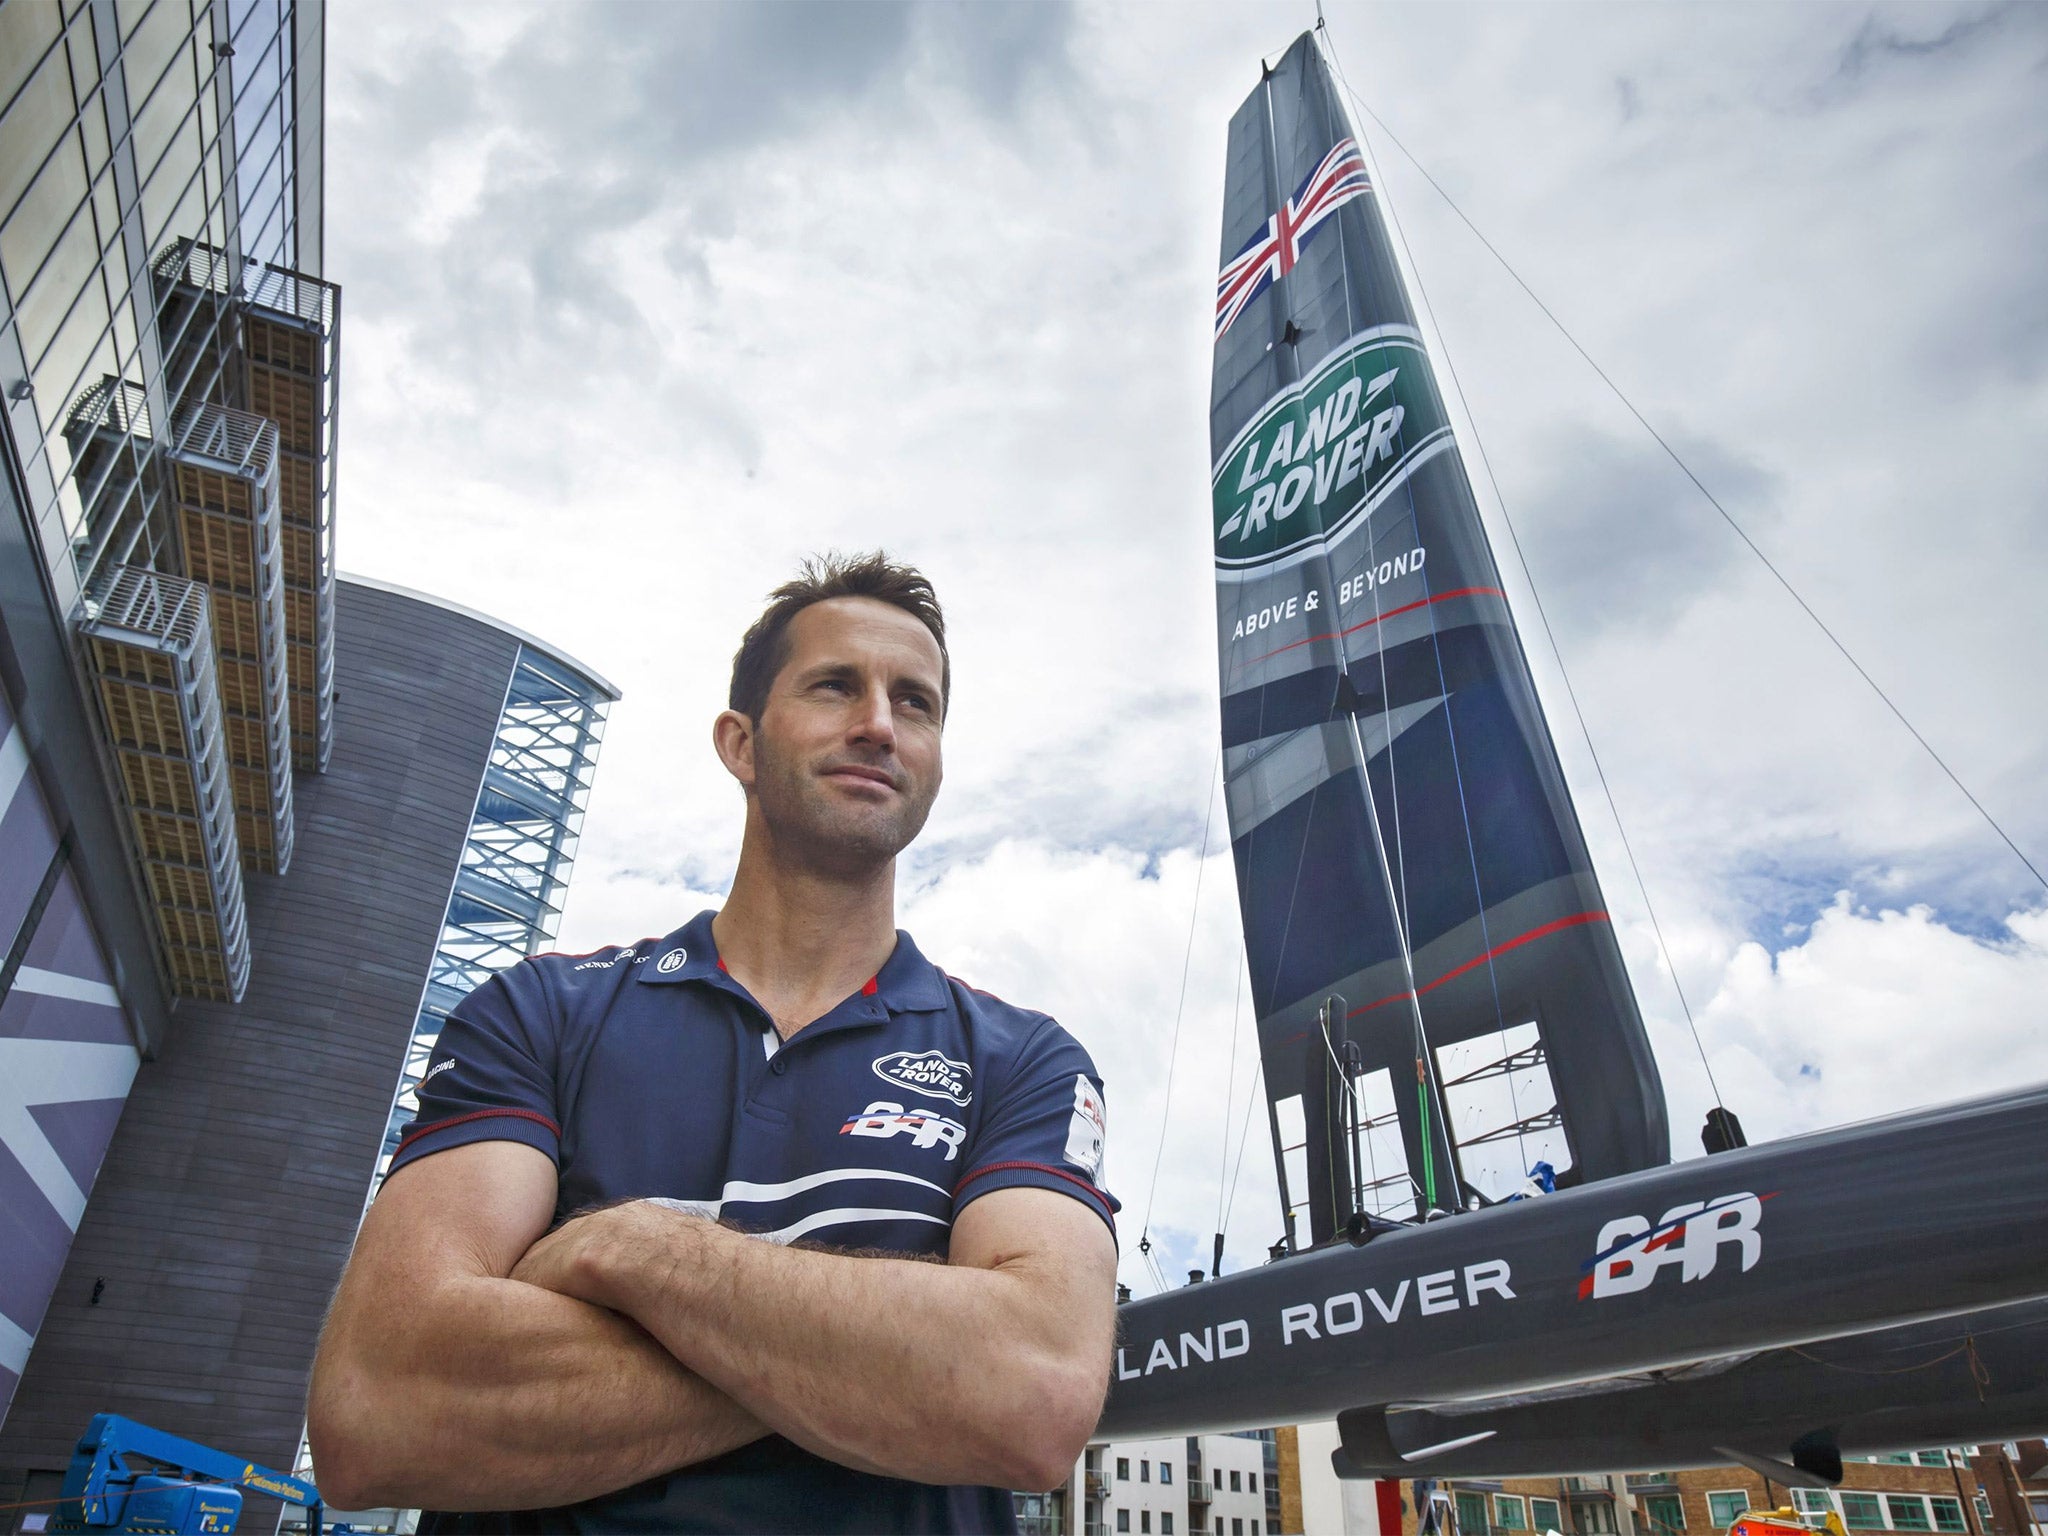 Sir Ben Ainslie said it would ‘be the pinnacle’ of his career to win the America’s Cup for Britain